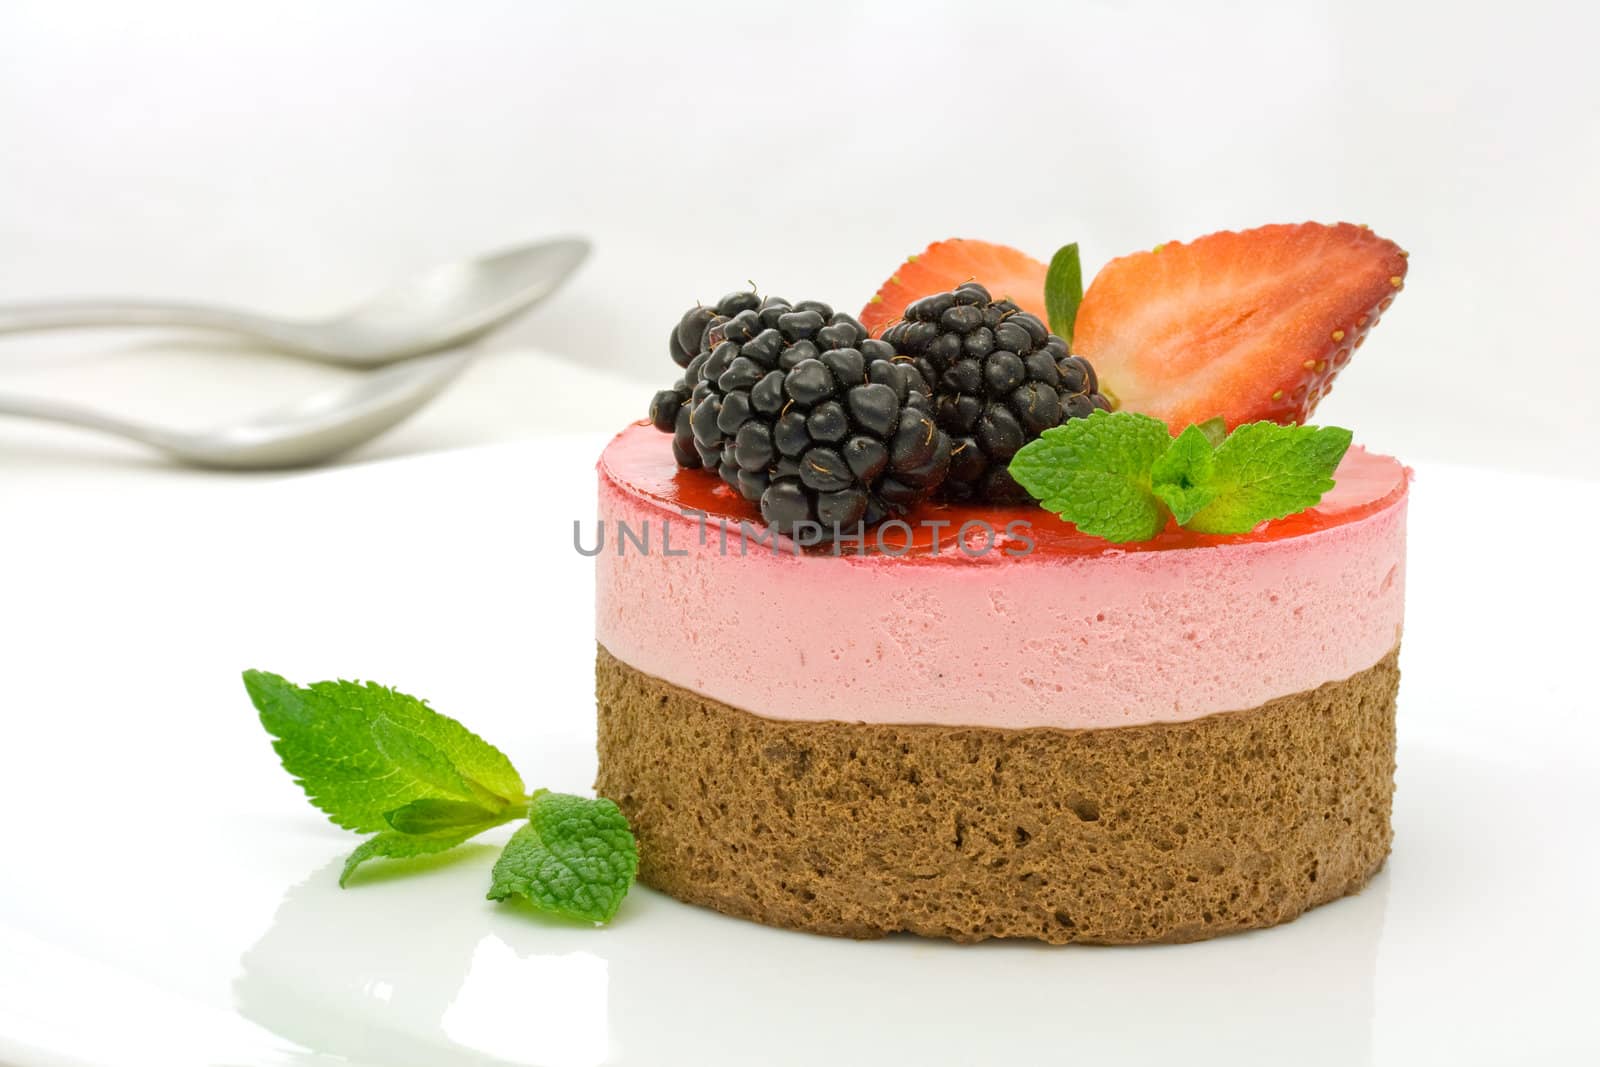 Chocolate and strawberry cake decorated with mulberries and mint leaves